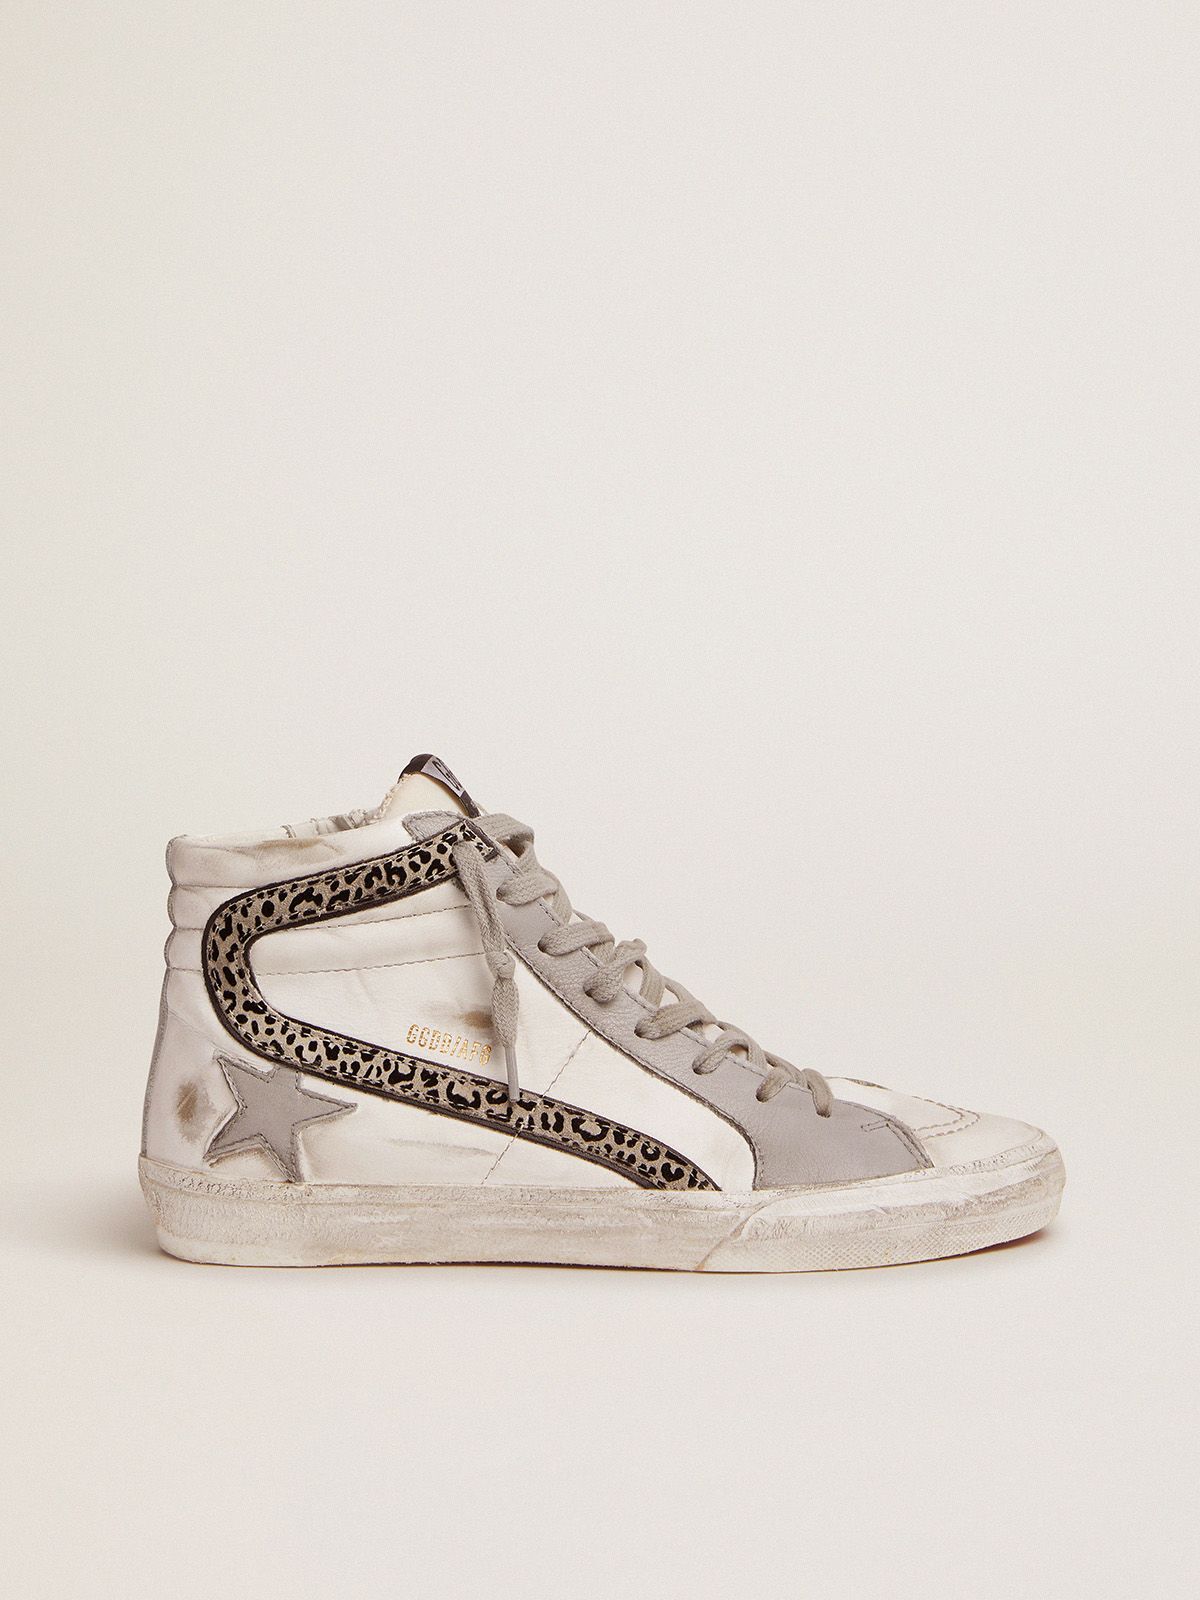 golden goose flash leopard-print with leather sneakers suede white upper and gray Slide